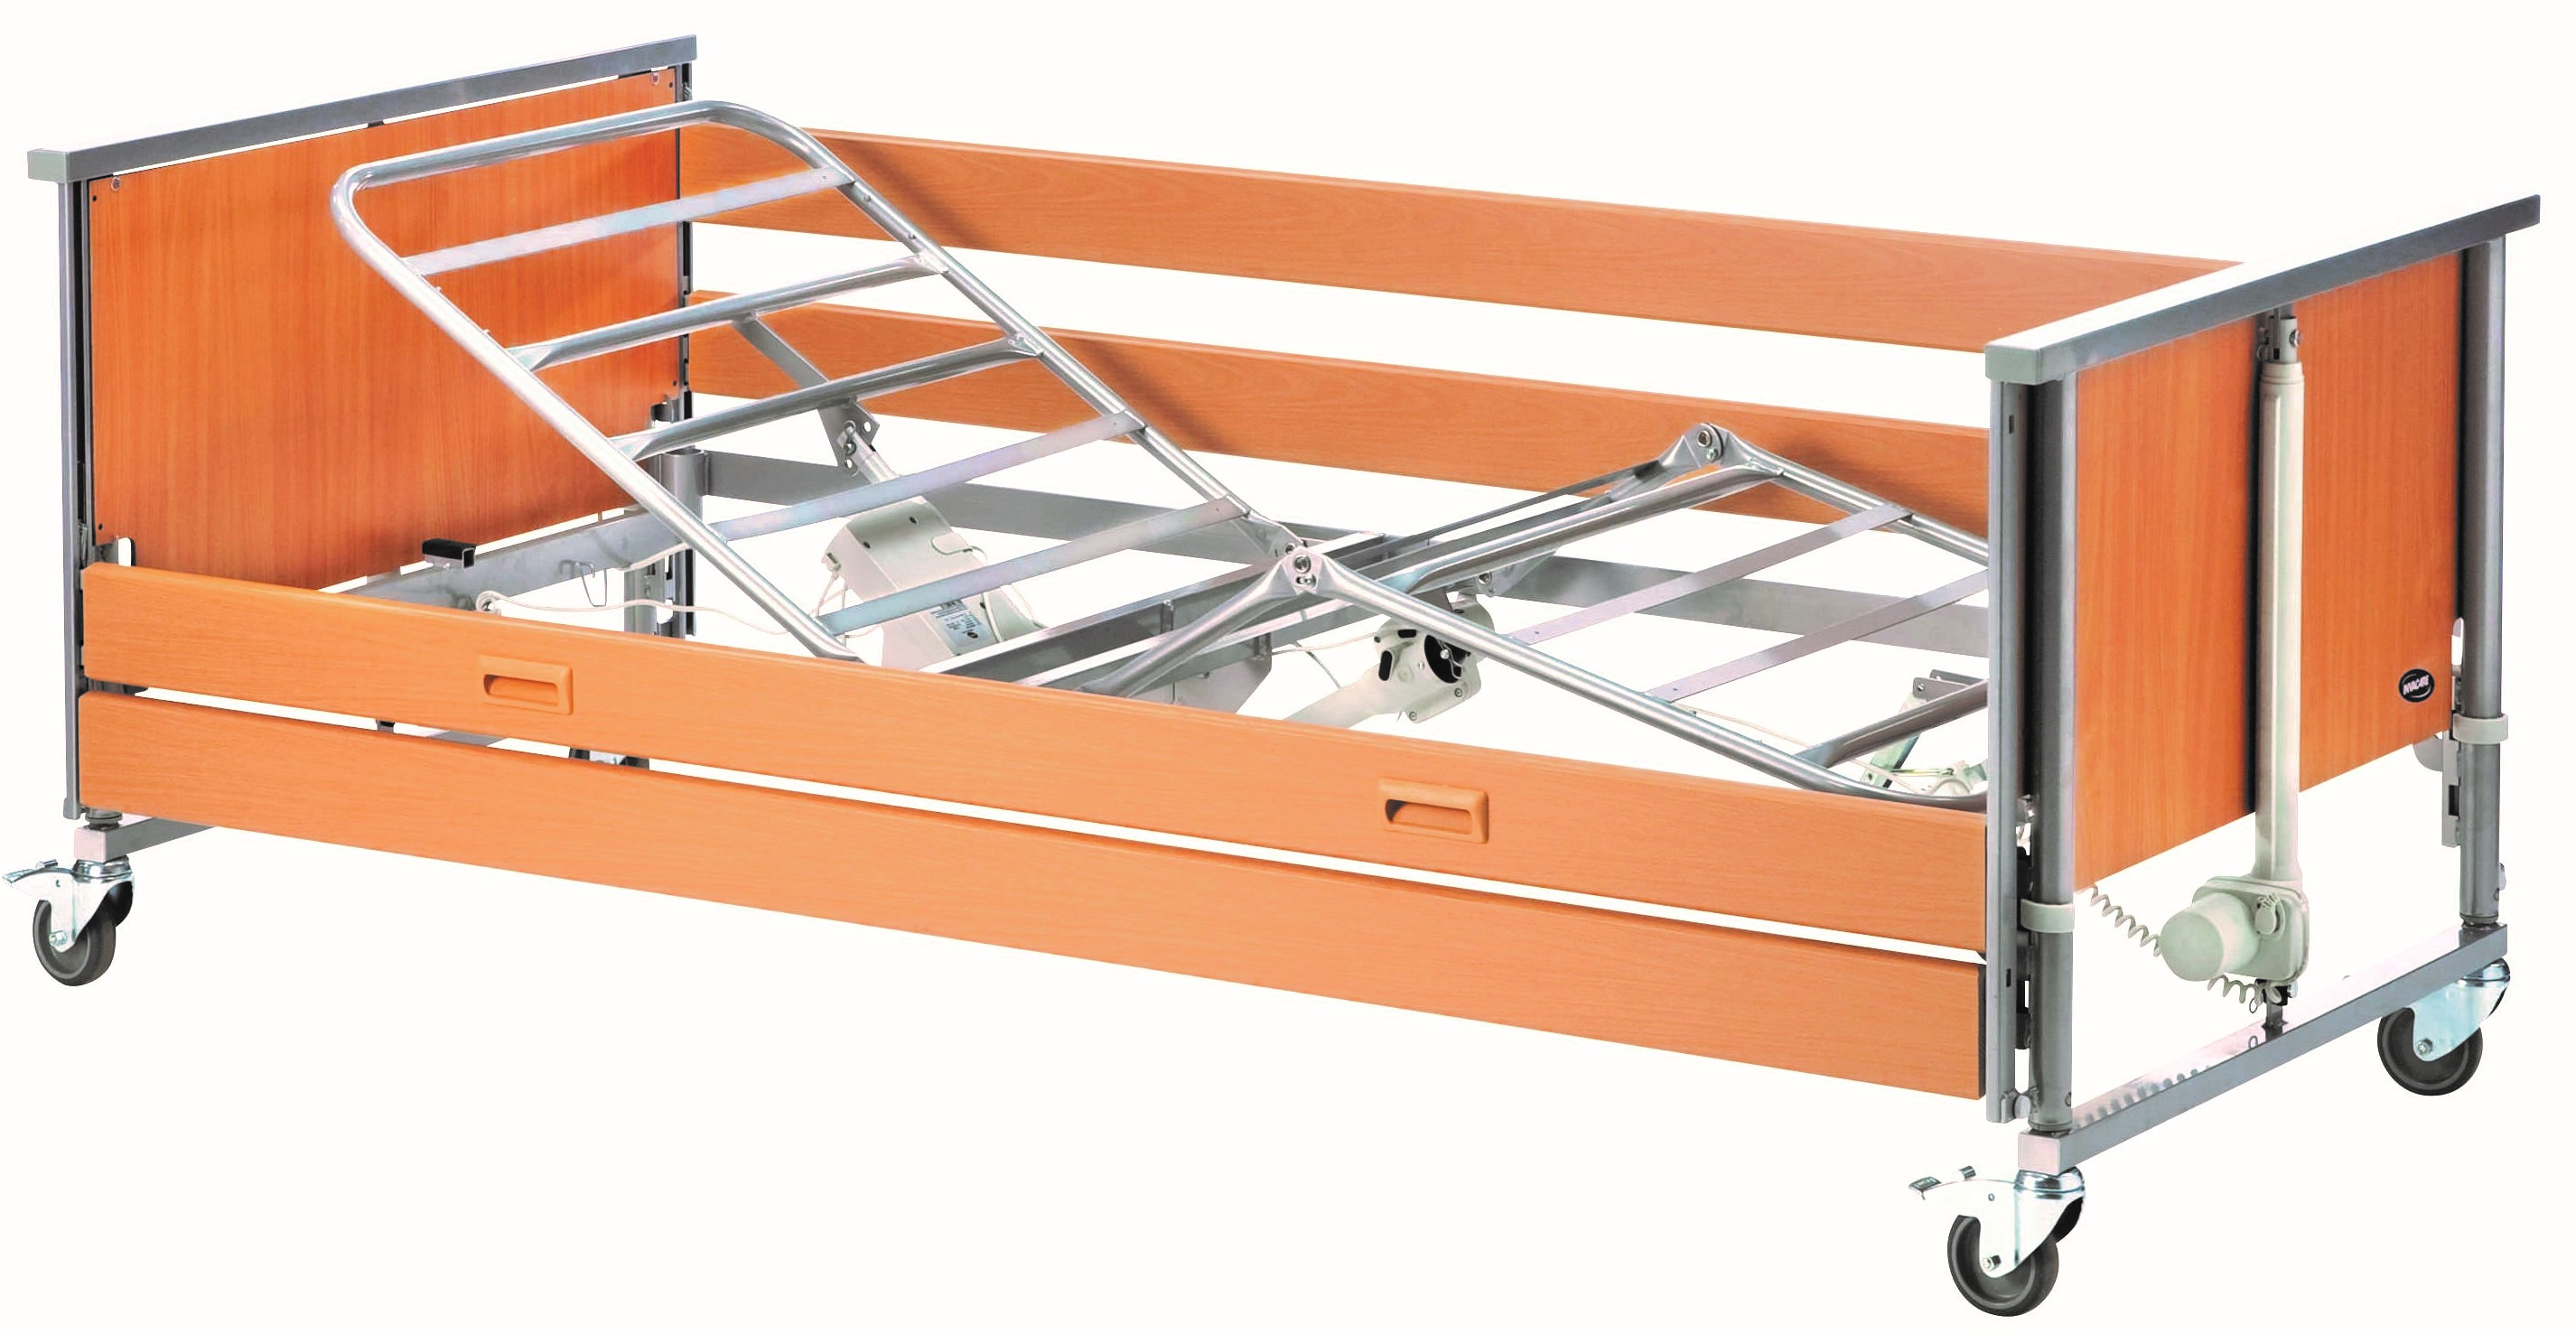 The Medley Ergo Profiling Bed is available to hire at Homecare Medical